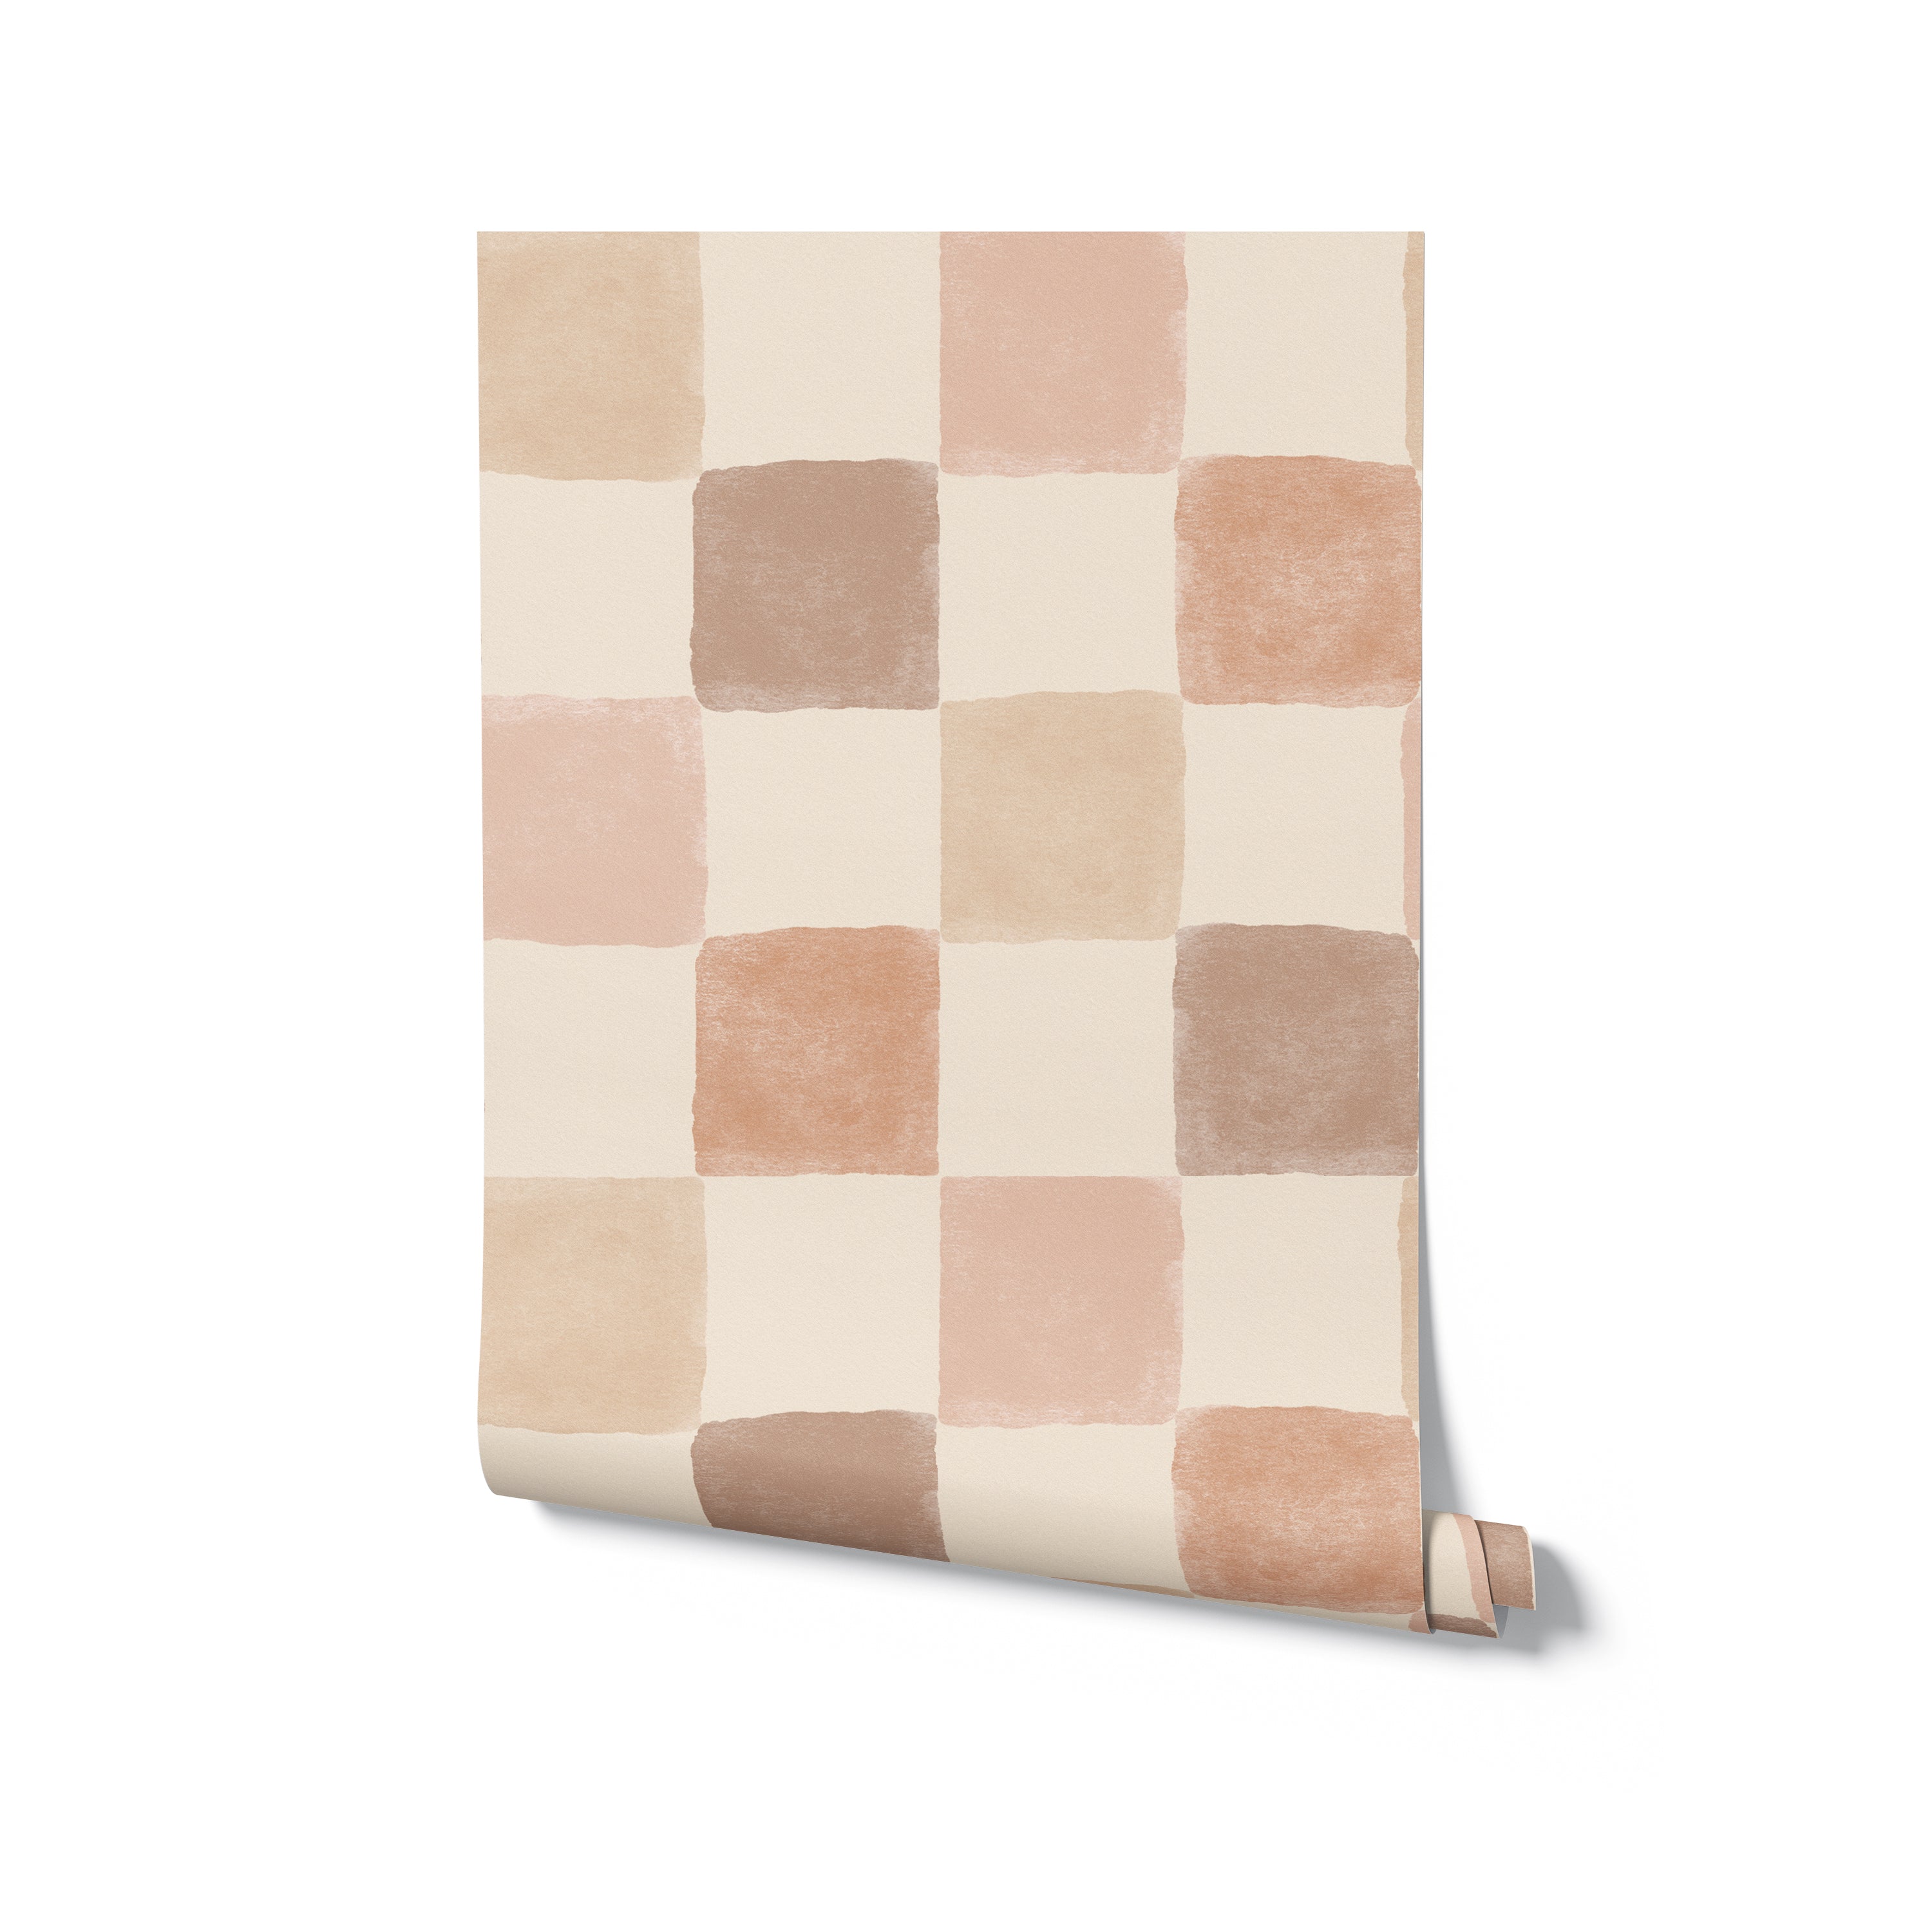 Rolled sample of Clémence Wallpaper displaying a gentle grid pattern in muted tones of peach, taupe, and beige, ideal for adding a touch of serene elegance to any living space.